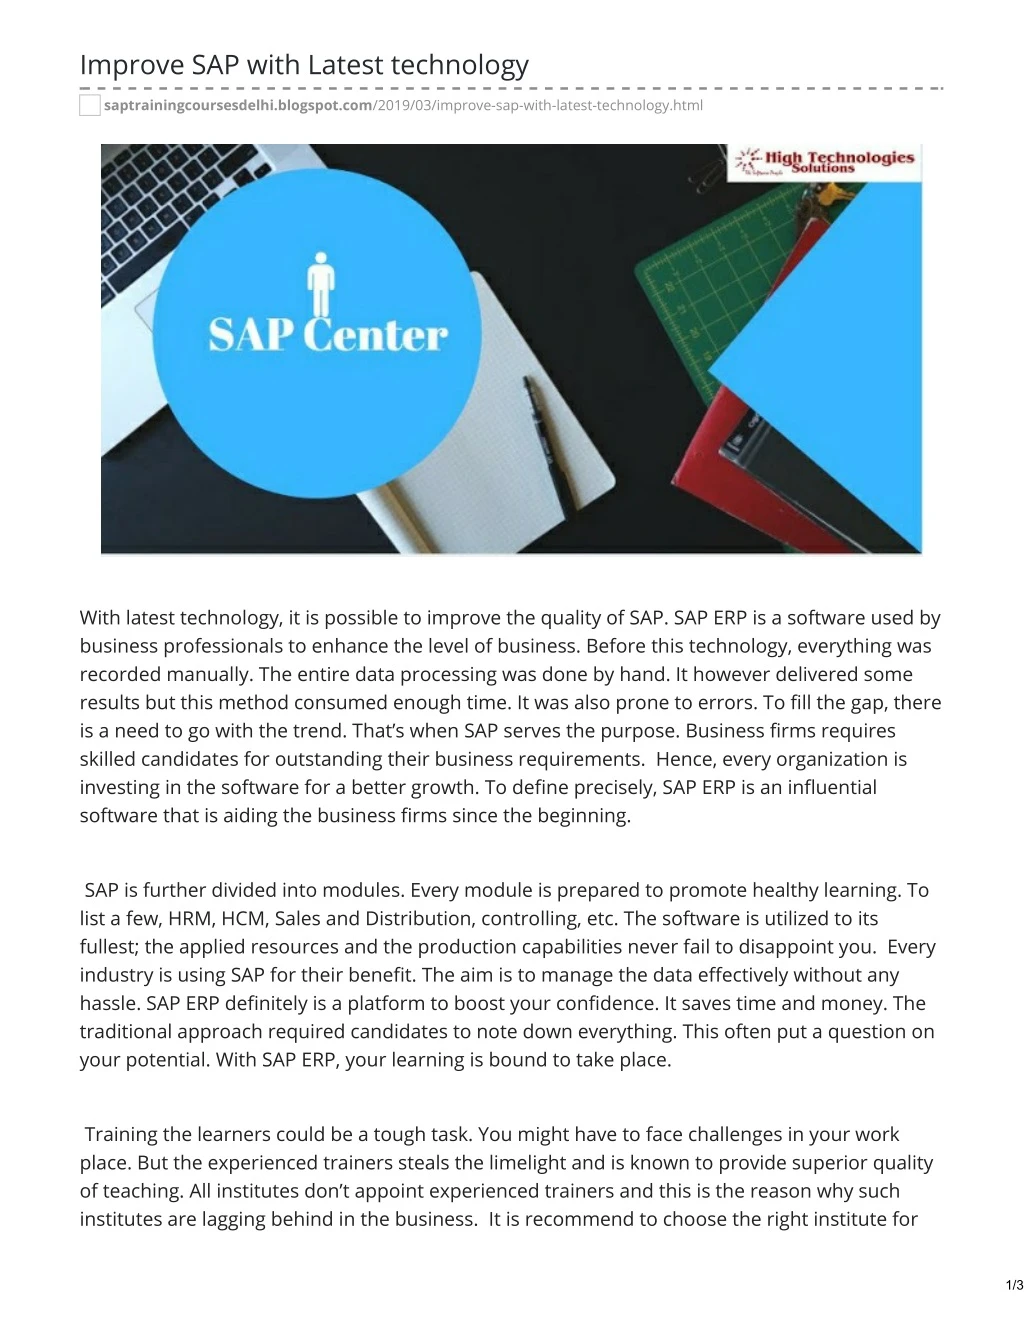 improve sap with latest technology